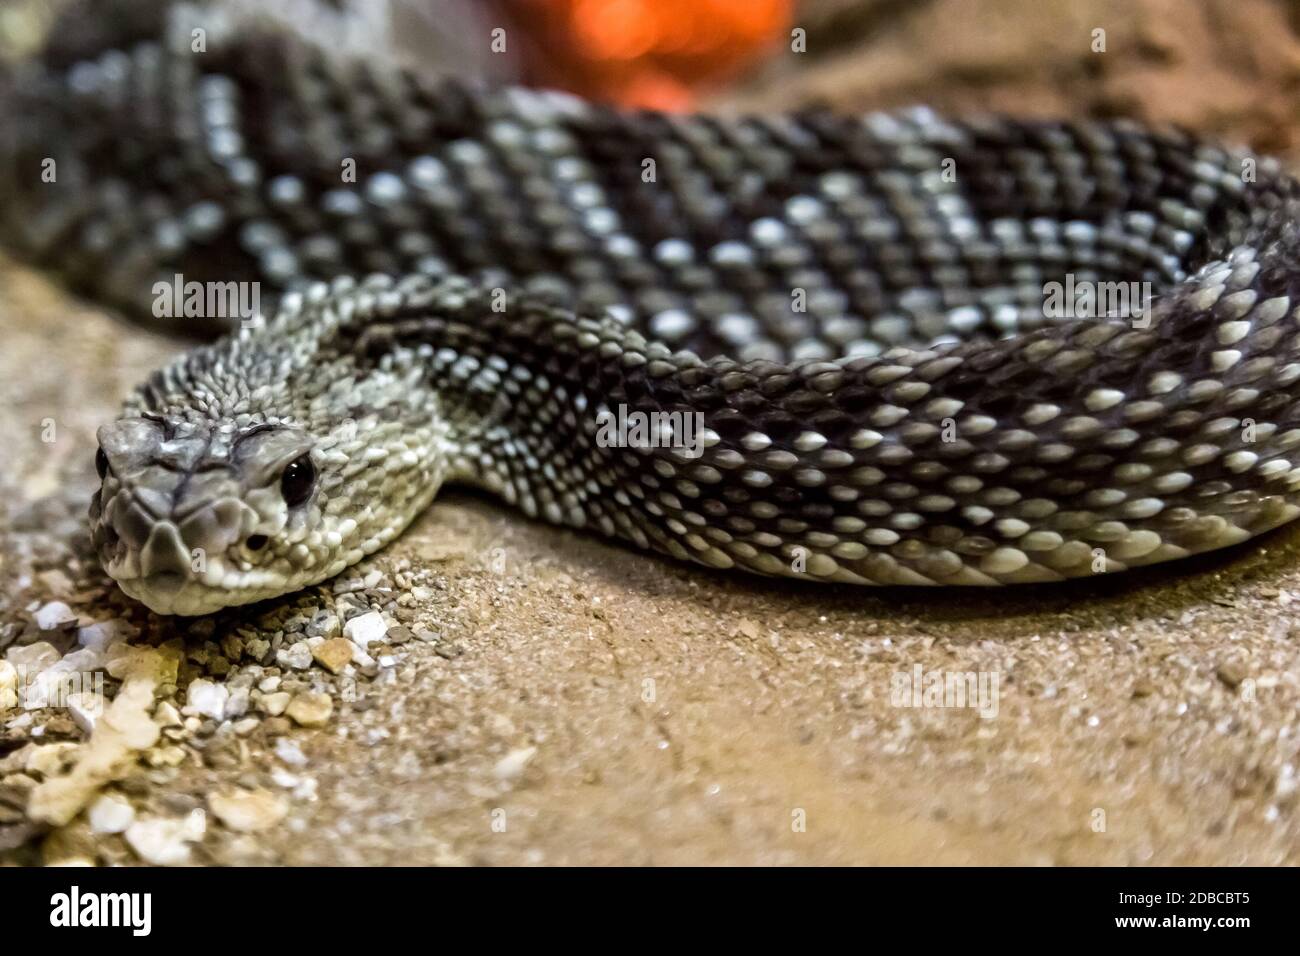 Rattlesnake - Crotalus durissus, poisonous. Dangers. Stock Photo